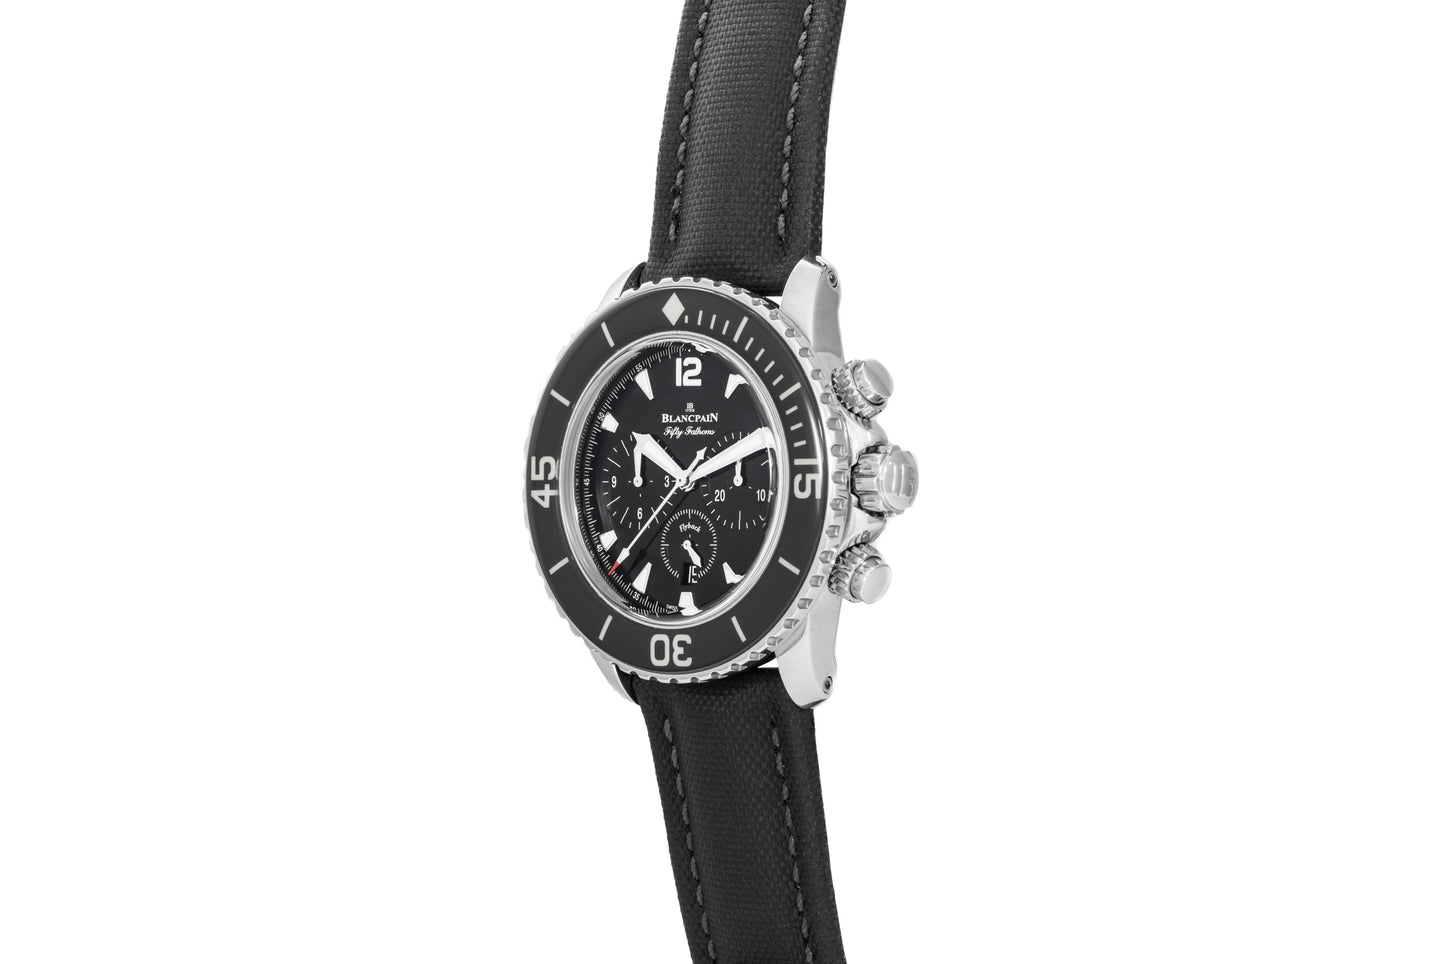 Blancpain Fifty Fathoms 'Flyback' Chronograph